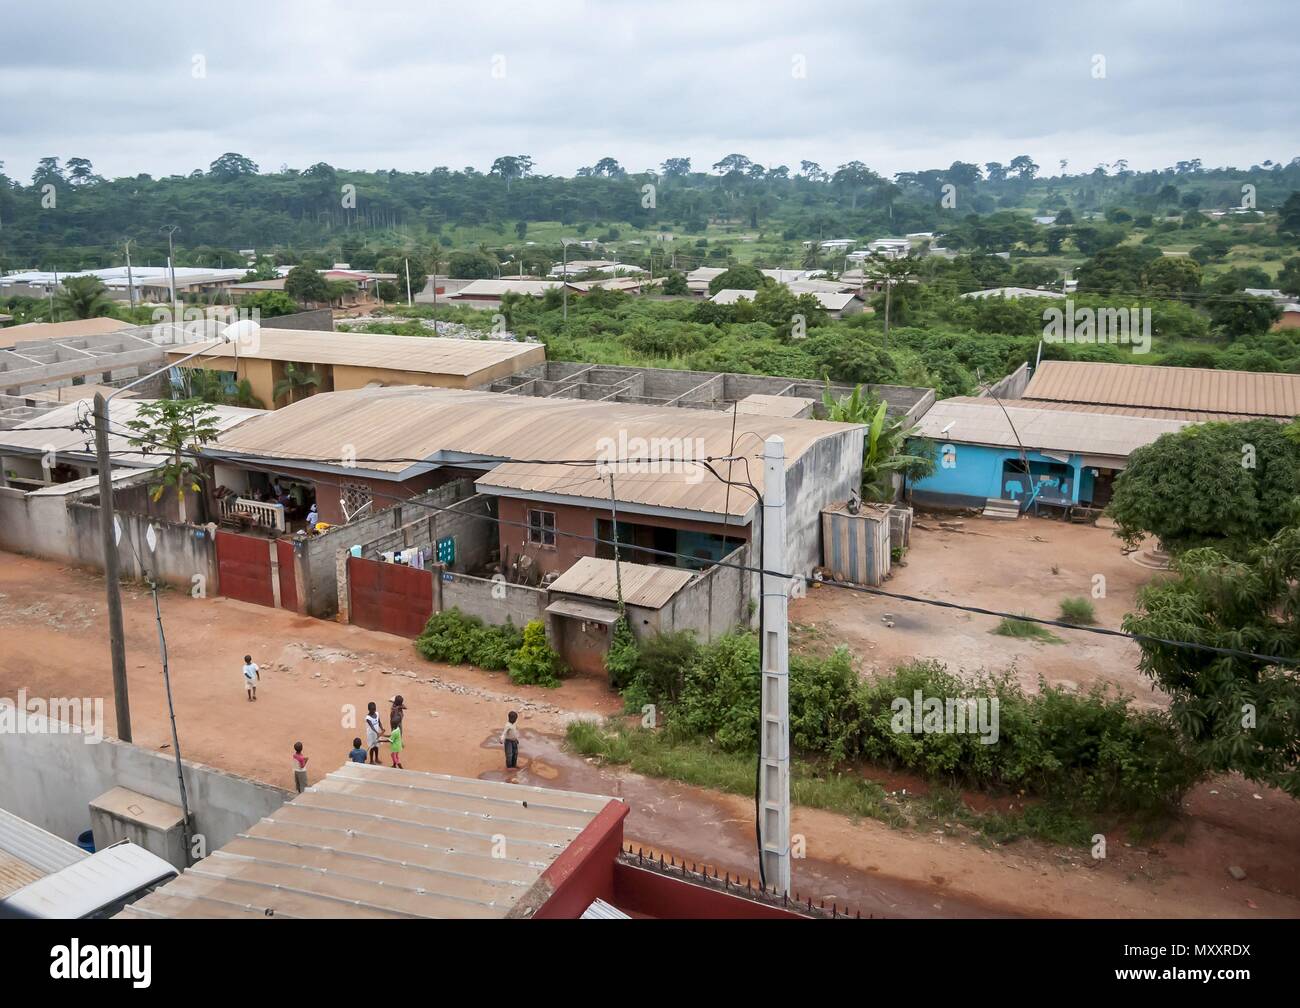 A general view of an African town of Daloa, Ivory Coast. July 2013. African shacks stock image. Stock Photo